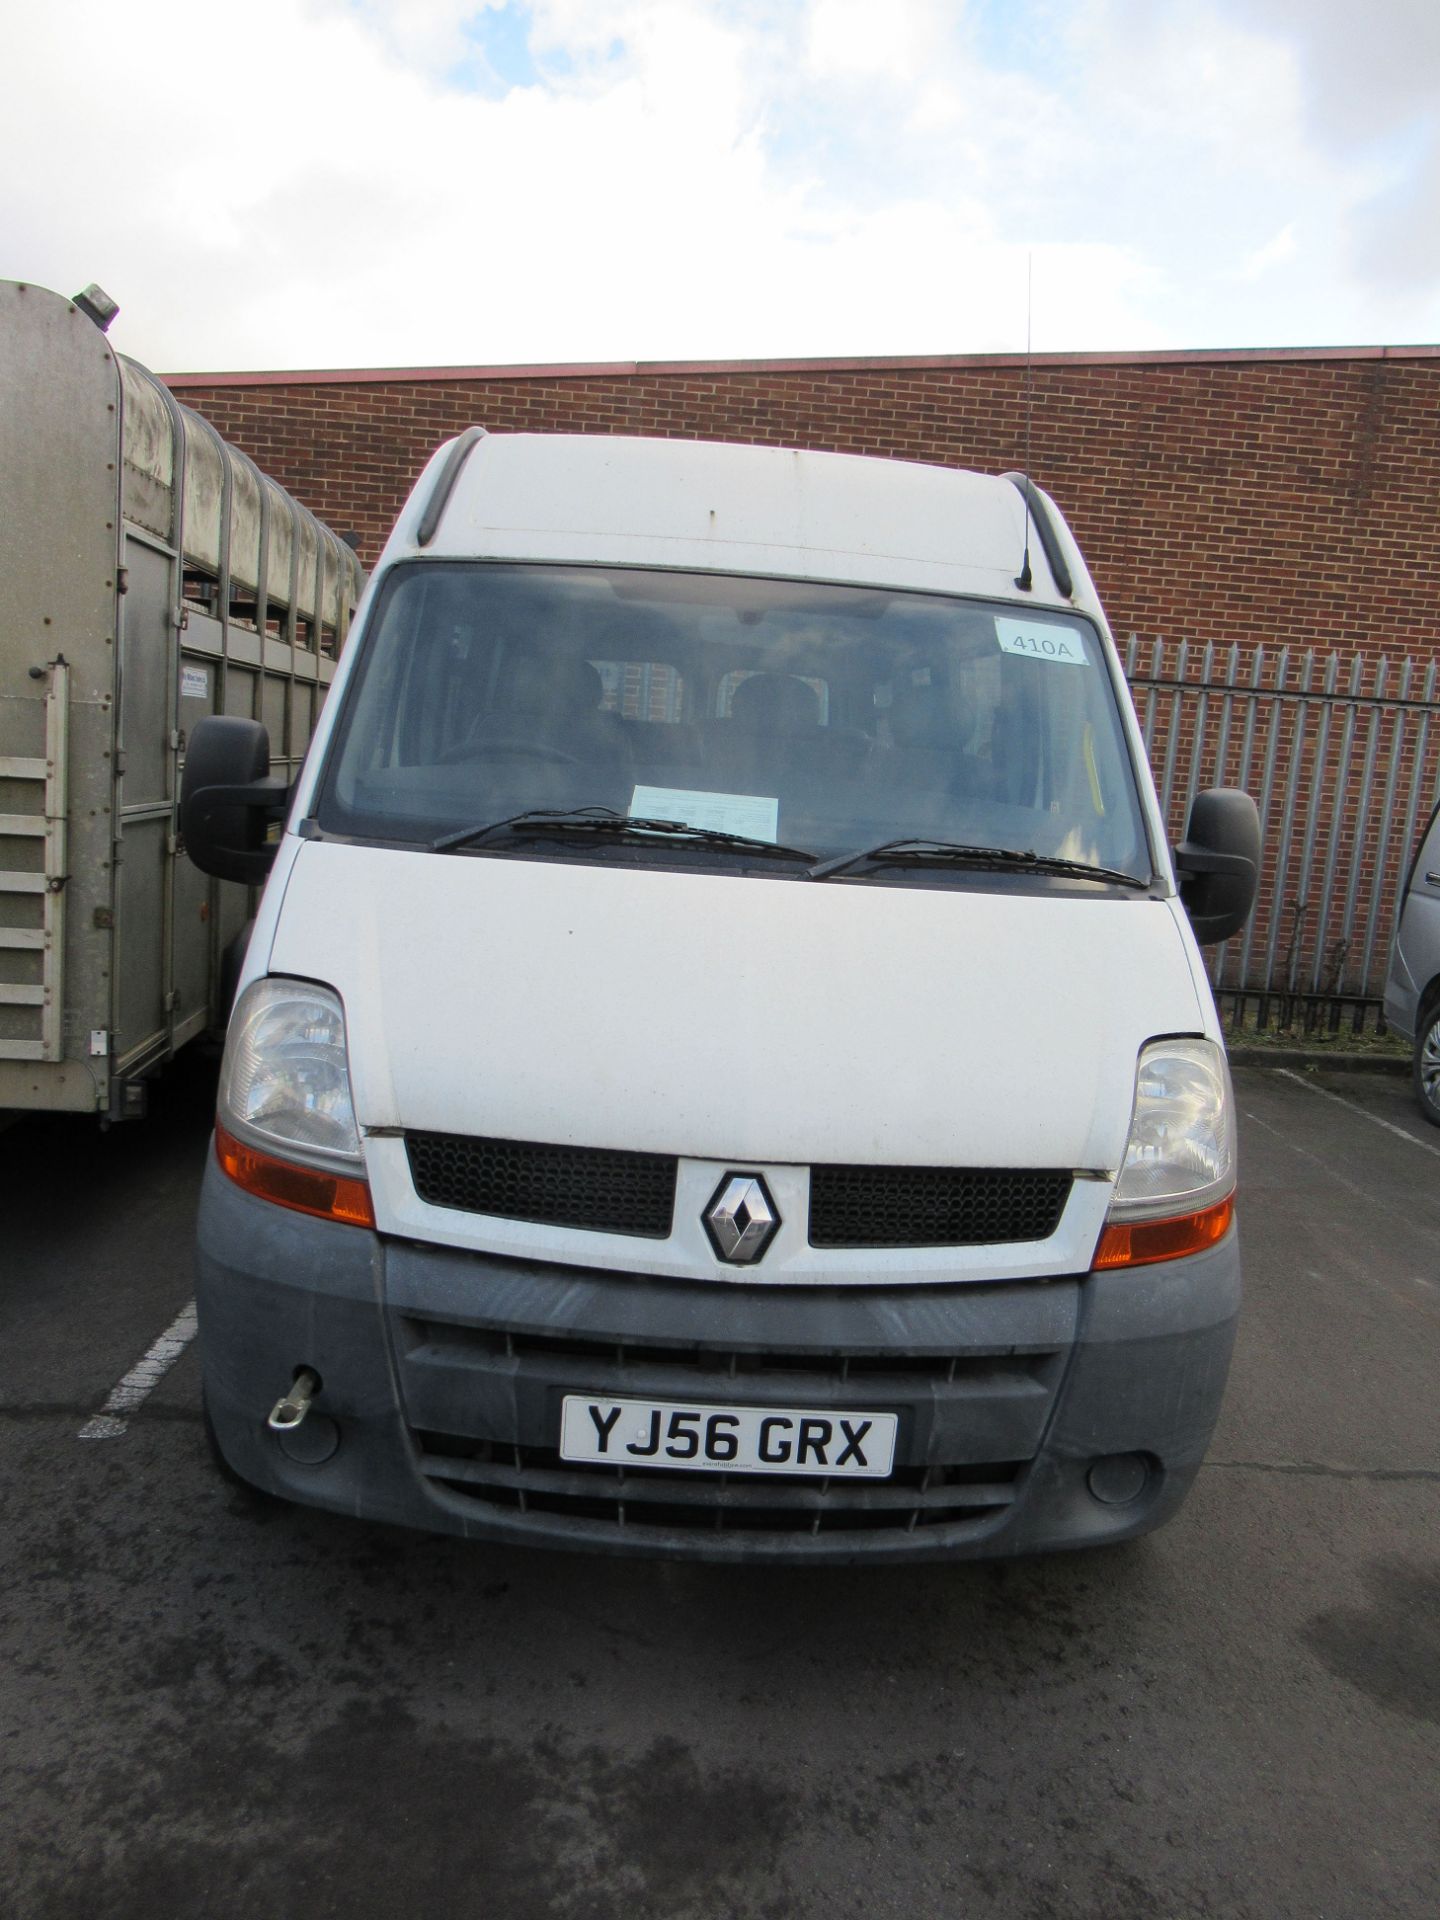 A Renault Dci 120 Mini Bus - Image 2 of 21